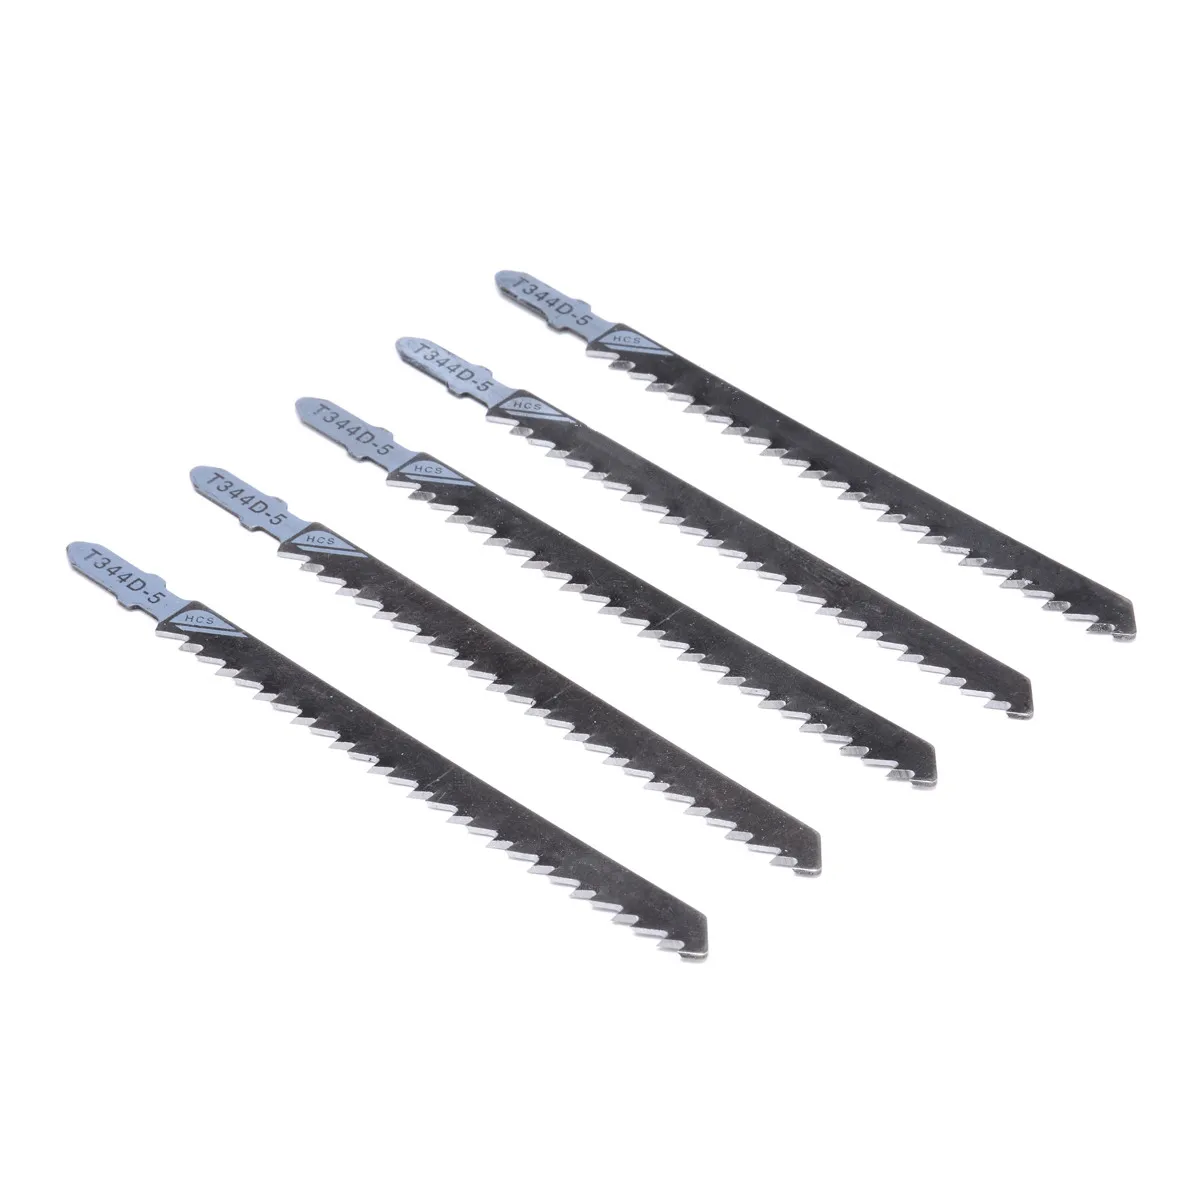 5pcs T344D HCS Curved Jigsaw Blades Extra Long For Wood Cutting 132mm Length·Set 